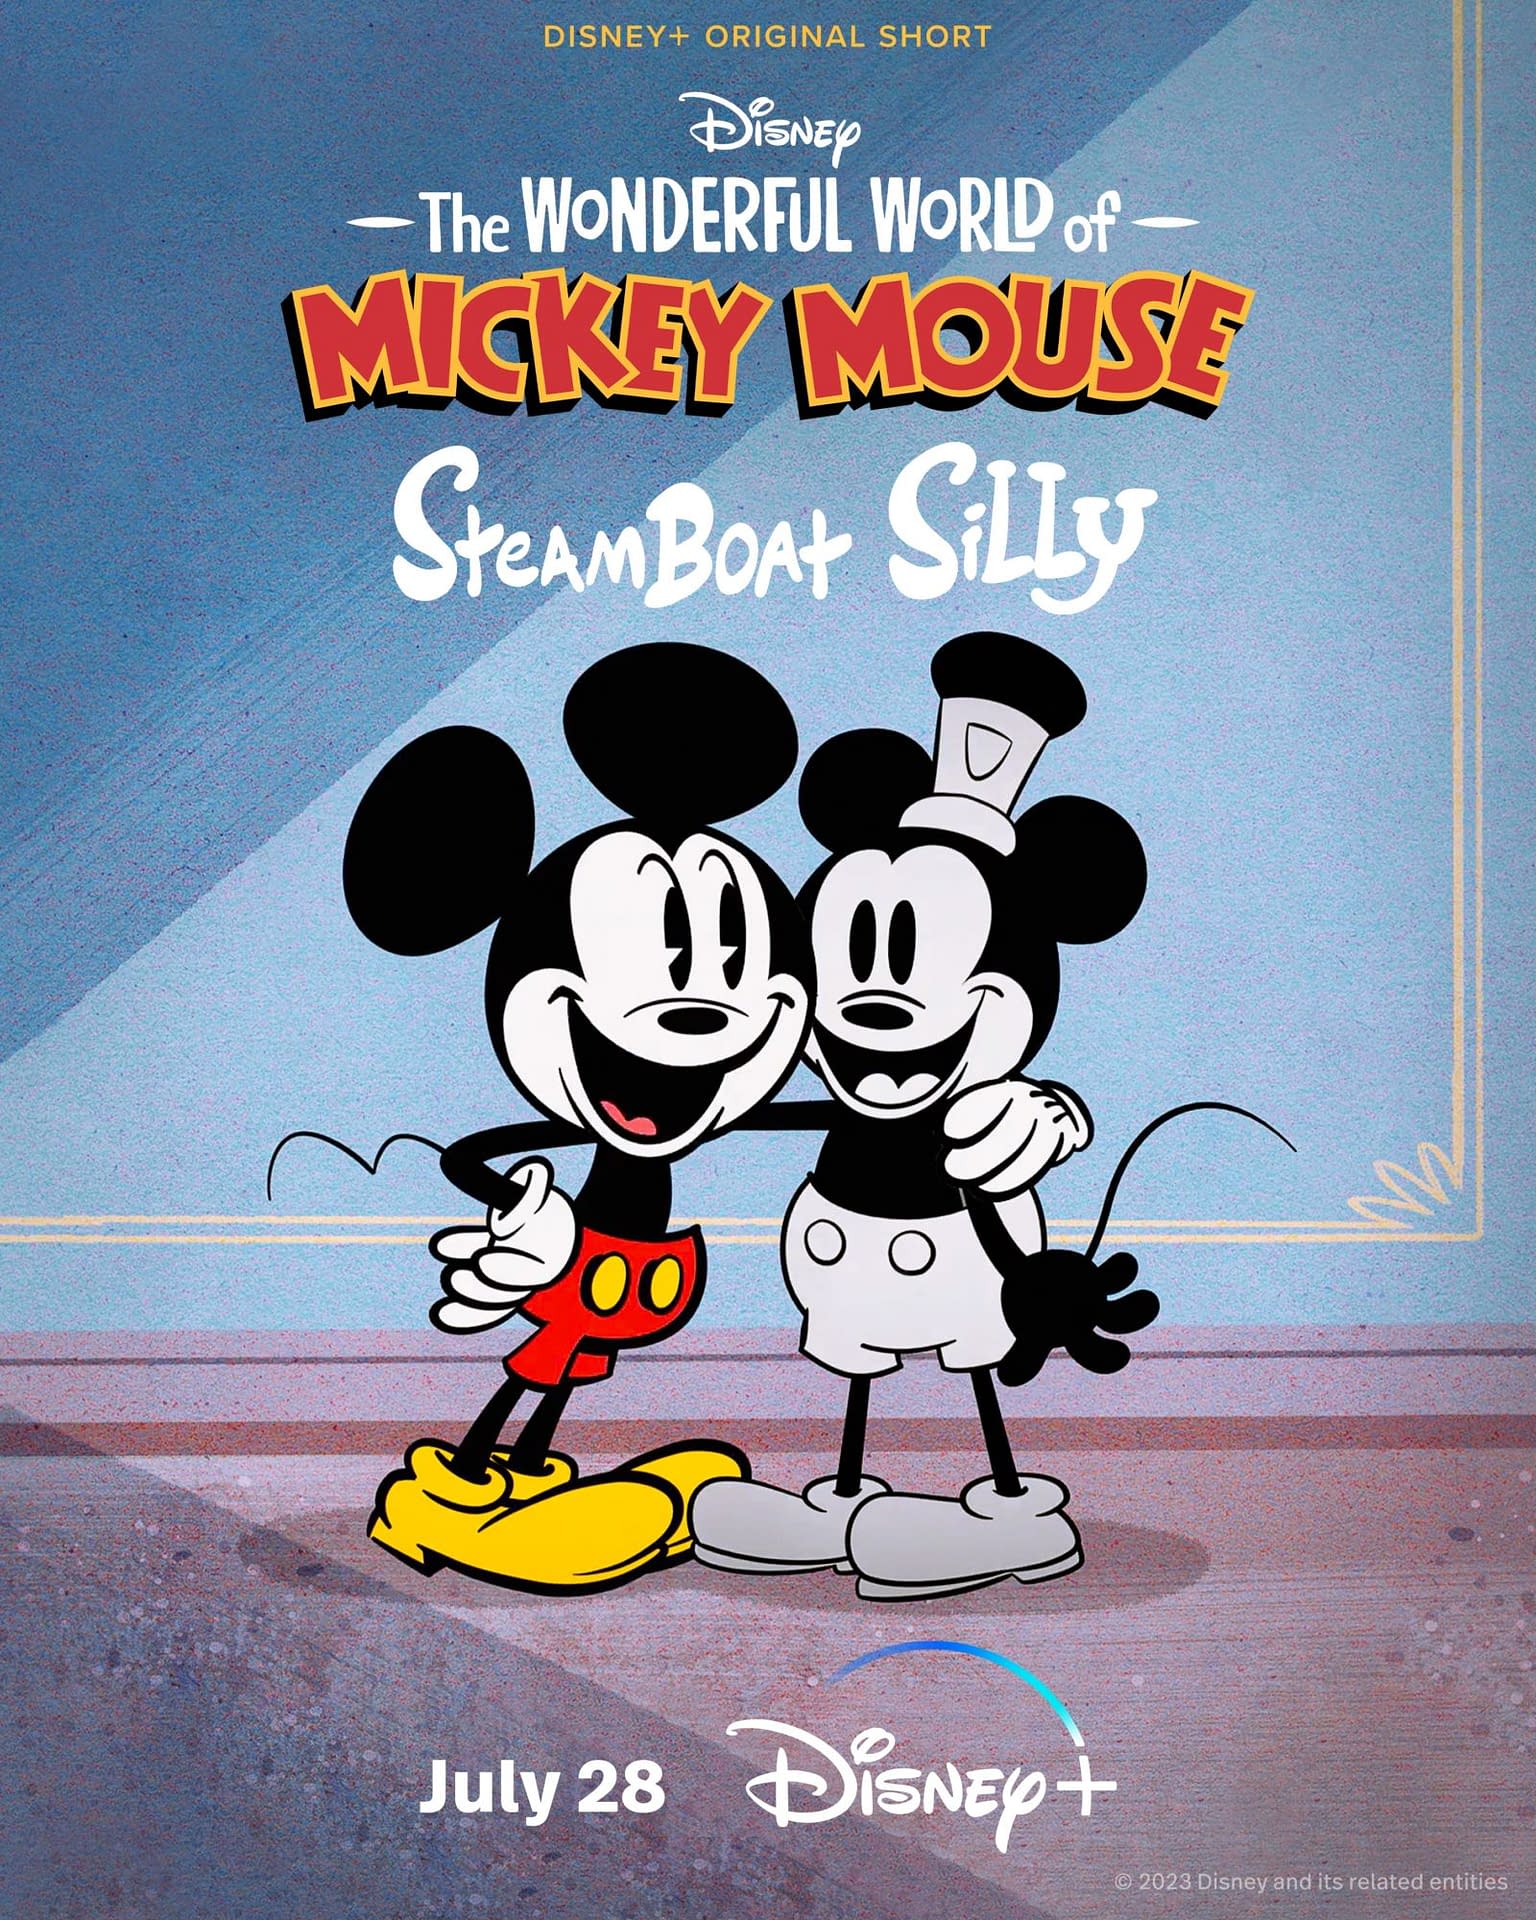 Steamboat Silly: Disney100 Trailer Intros Mickey Mouse Multiverse